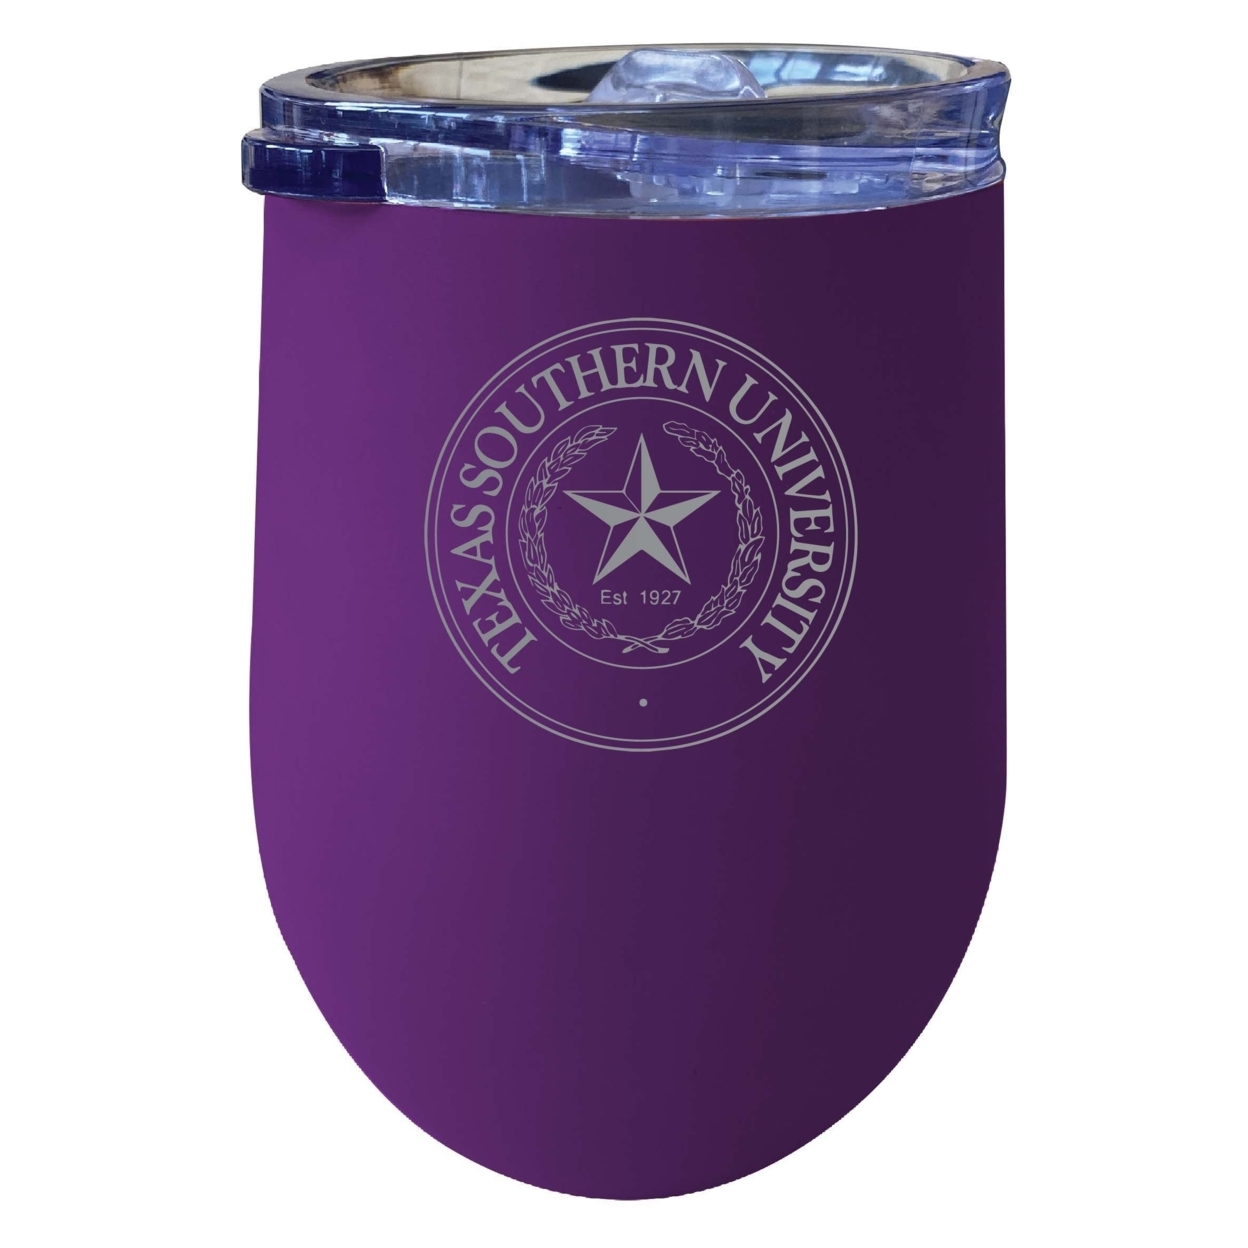 Texas Southern University 12 Oz Etched Insulated Wine Stainless Steel Tumbler Purple